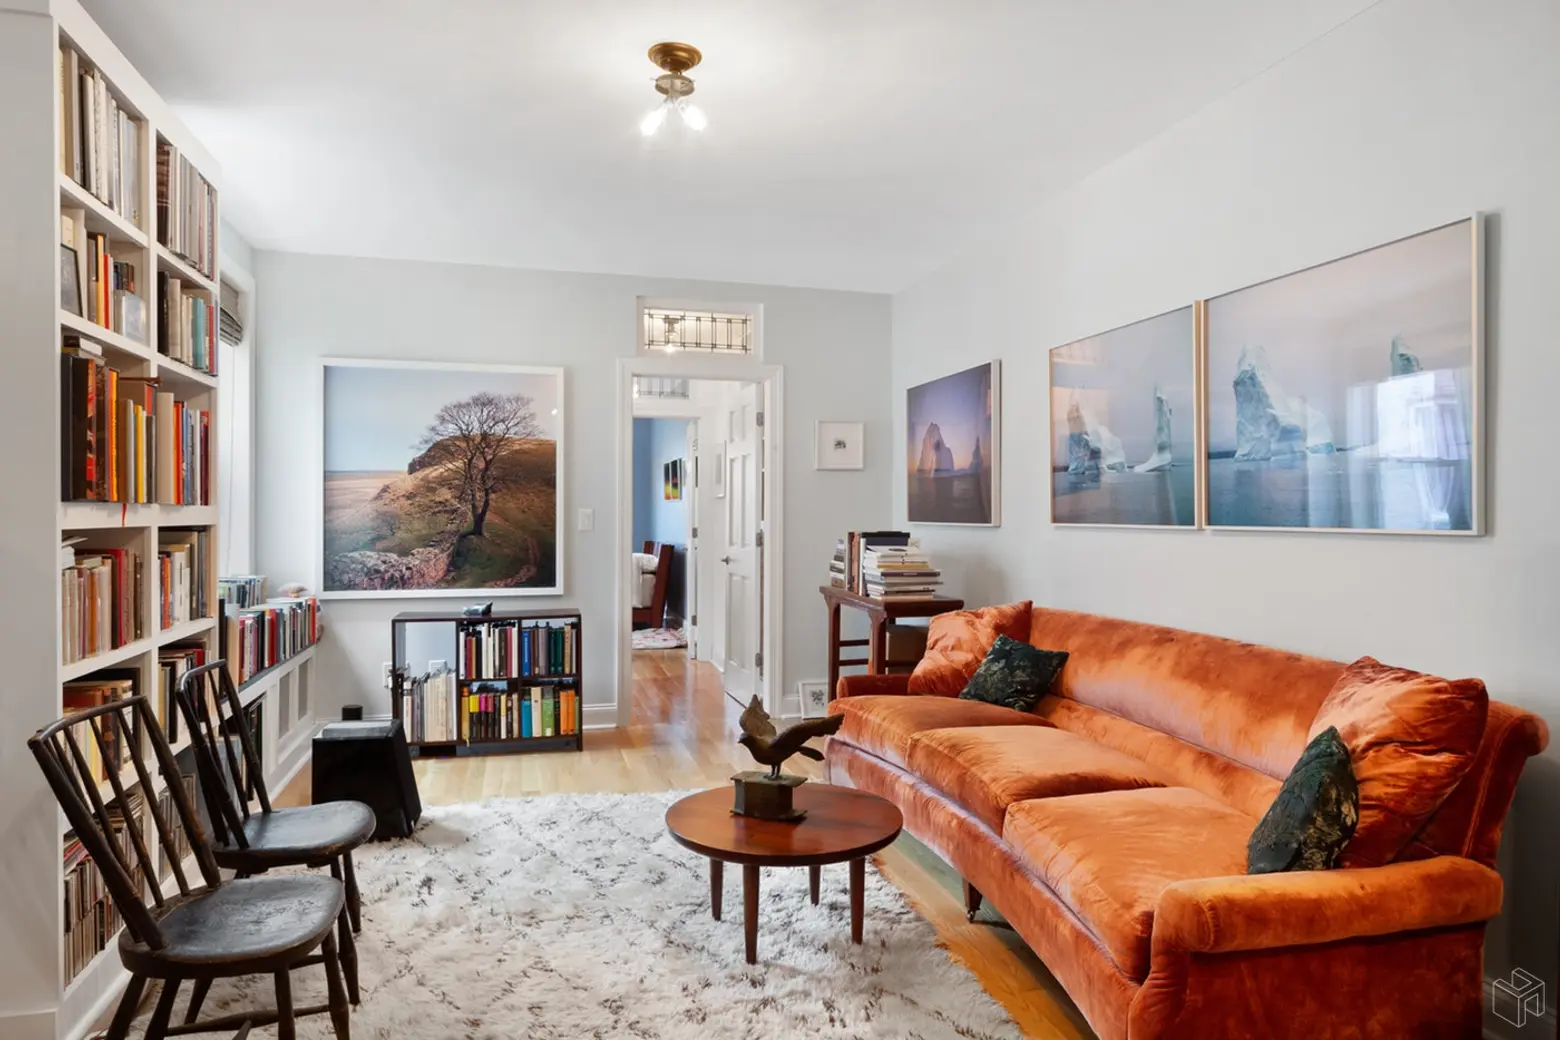 For just $279K, this classic Bronx co-op is renovated, bright, and across from Yankee Stadium